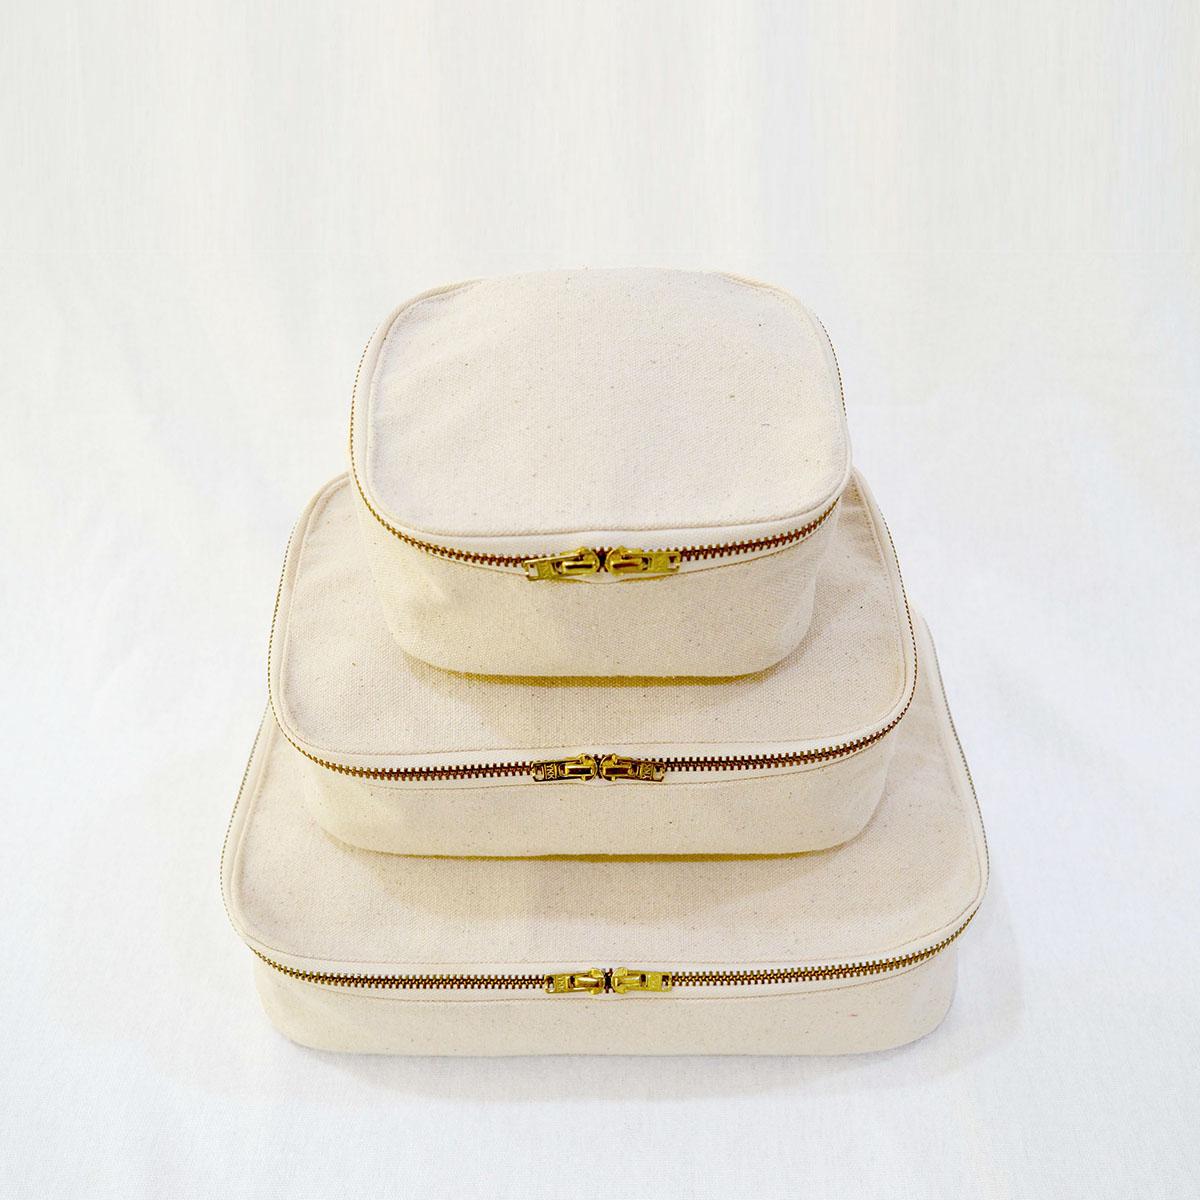 Home Essentials - Set of 3 nesting boxes available in various fabric options